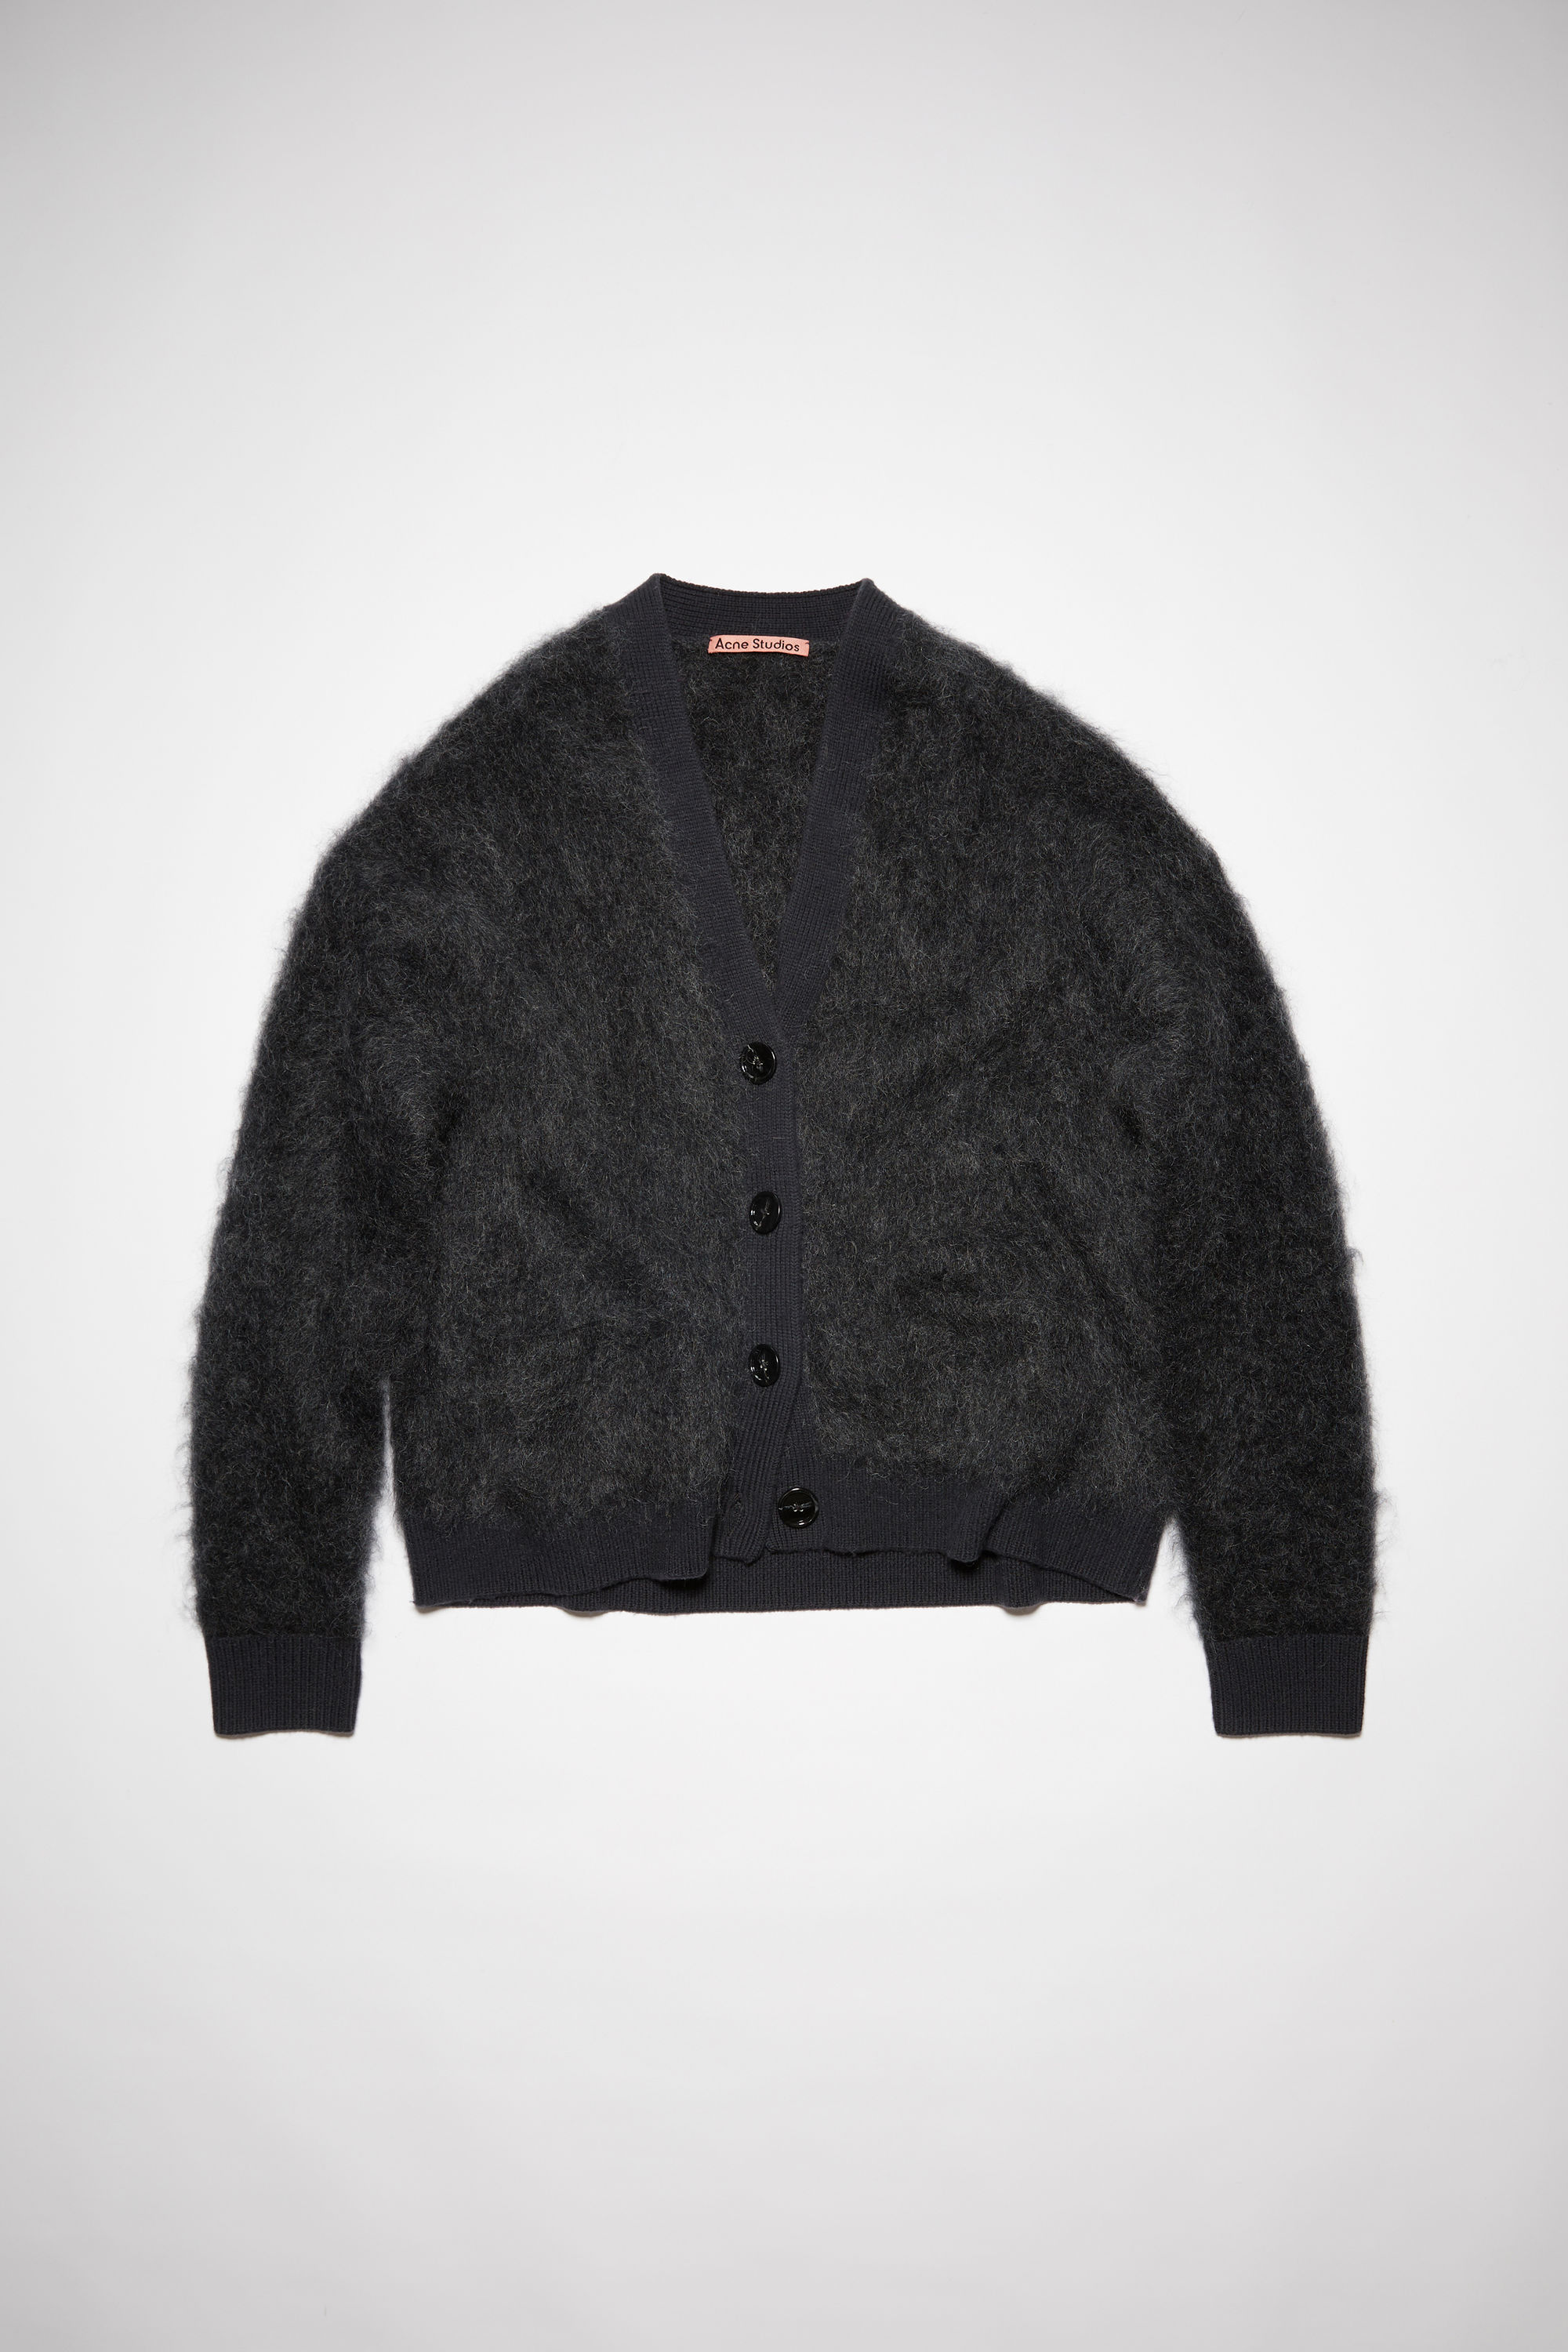 Acne Studios Mohair Wool Fluffy Cardigan In Anthracite Grey